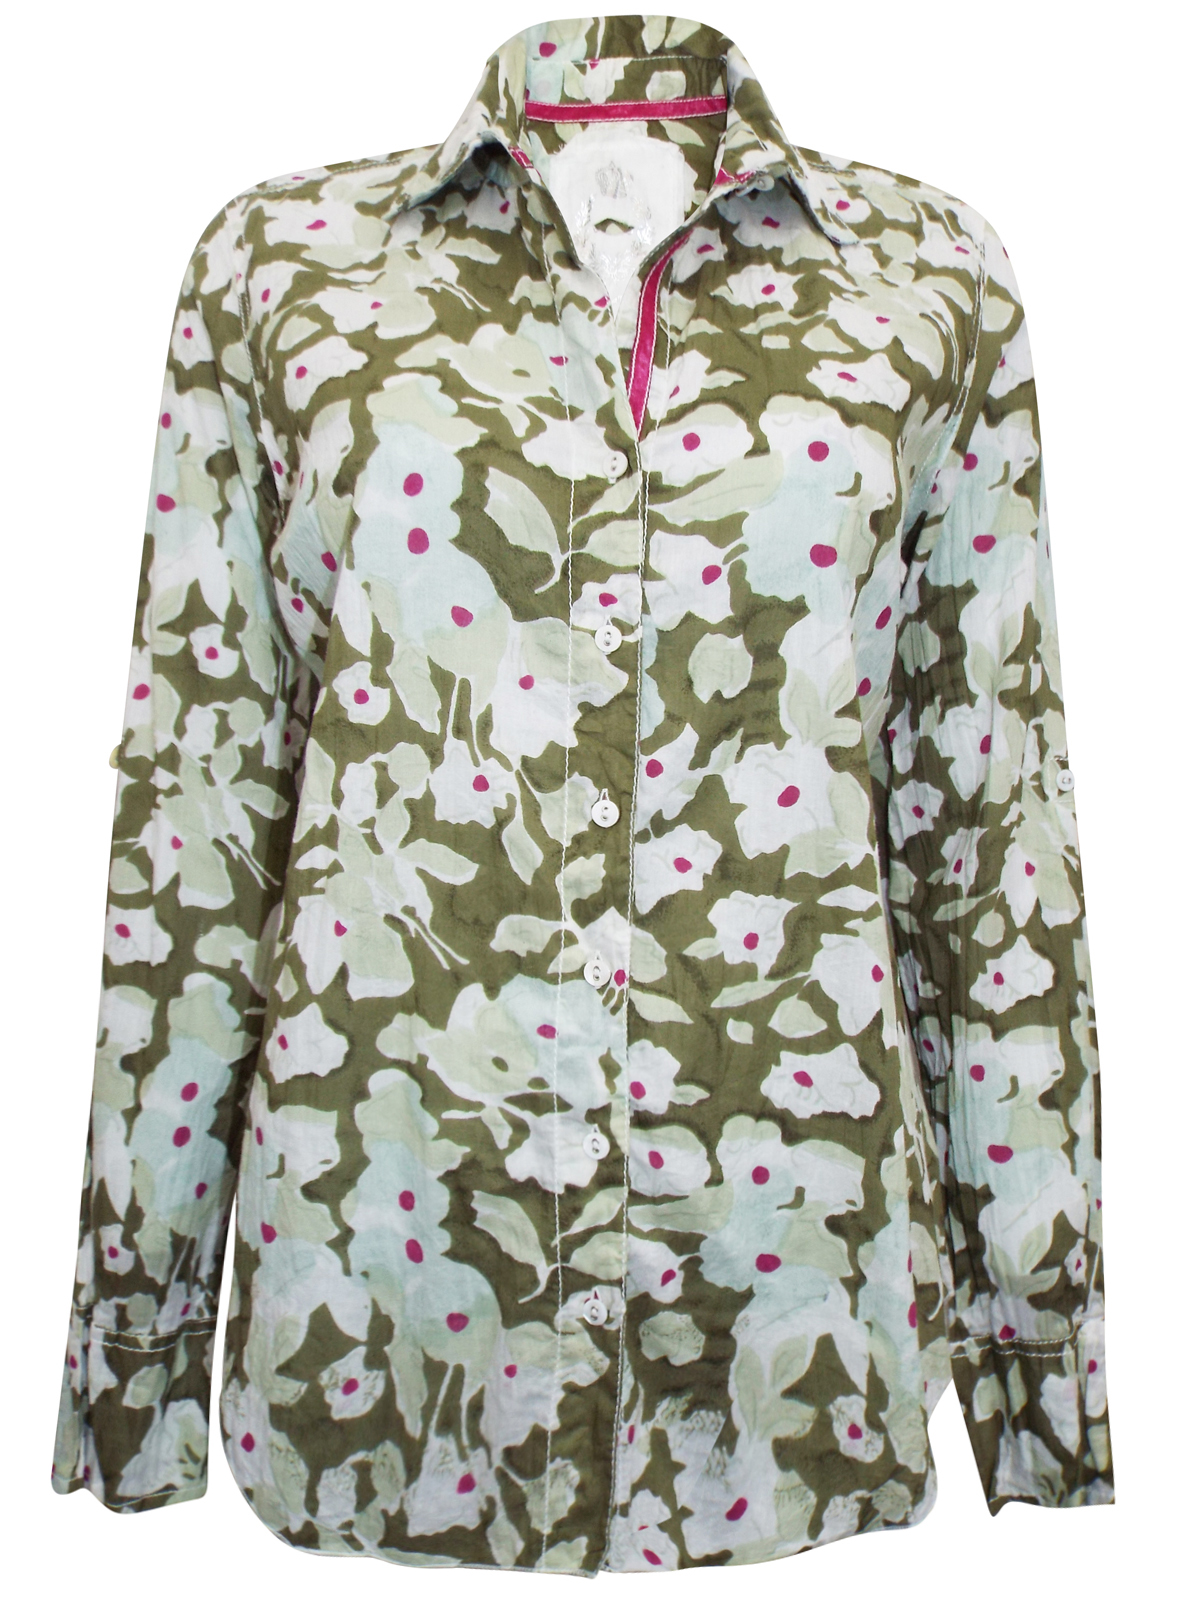 CINO - - CINO GREEN Floral Print Crinkle Cotton Shirt - Size 10 to 12 ...